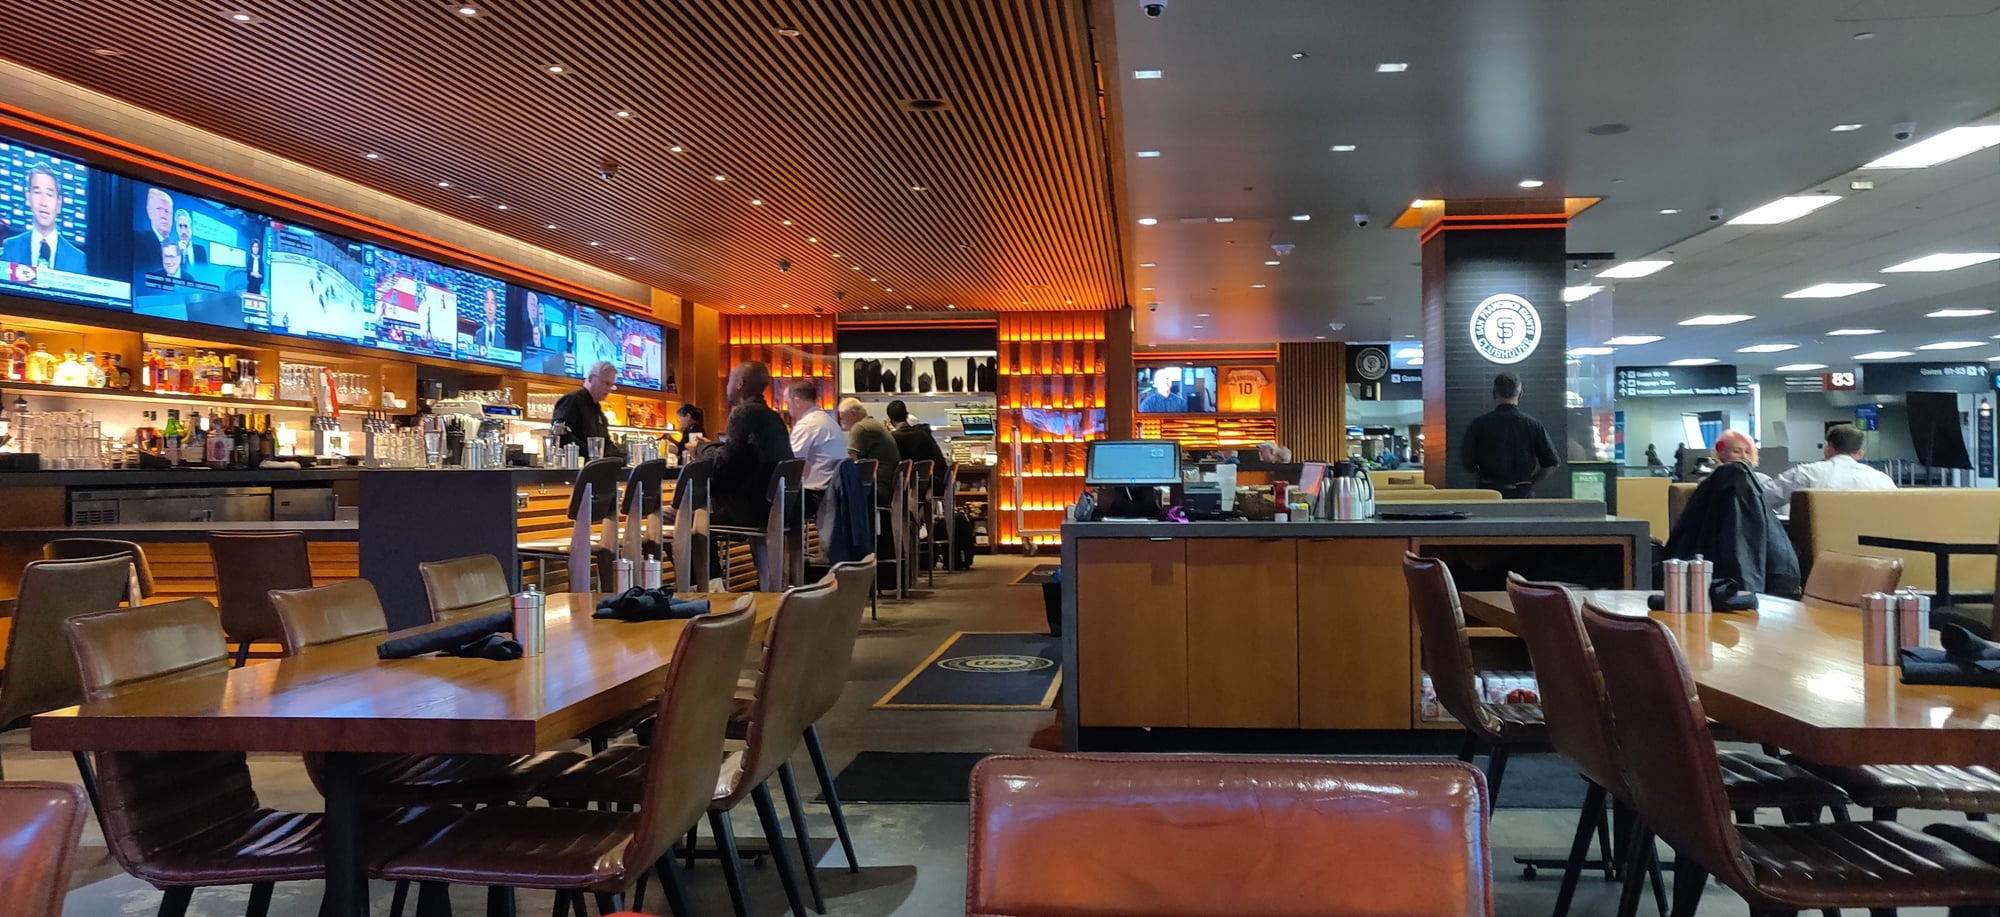 San Francisco (SFO) - Priority Pass lounges and options - Page 3